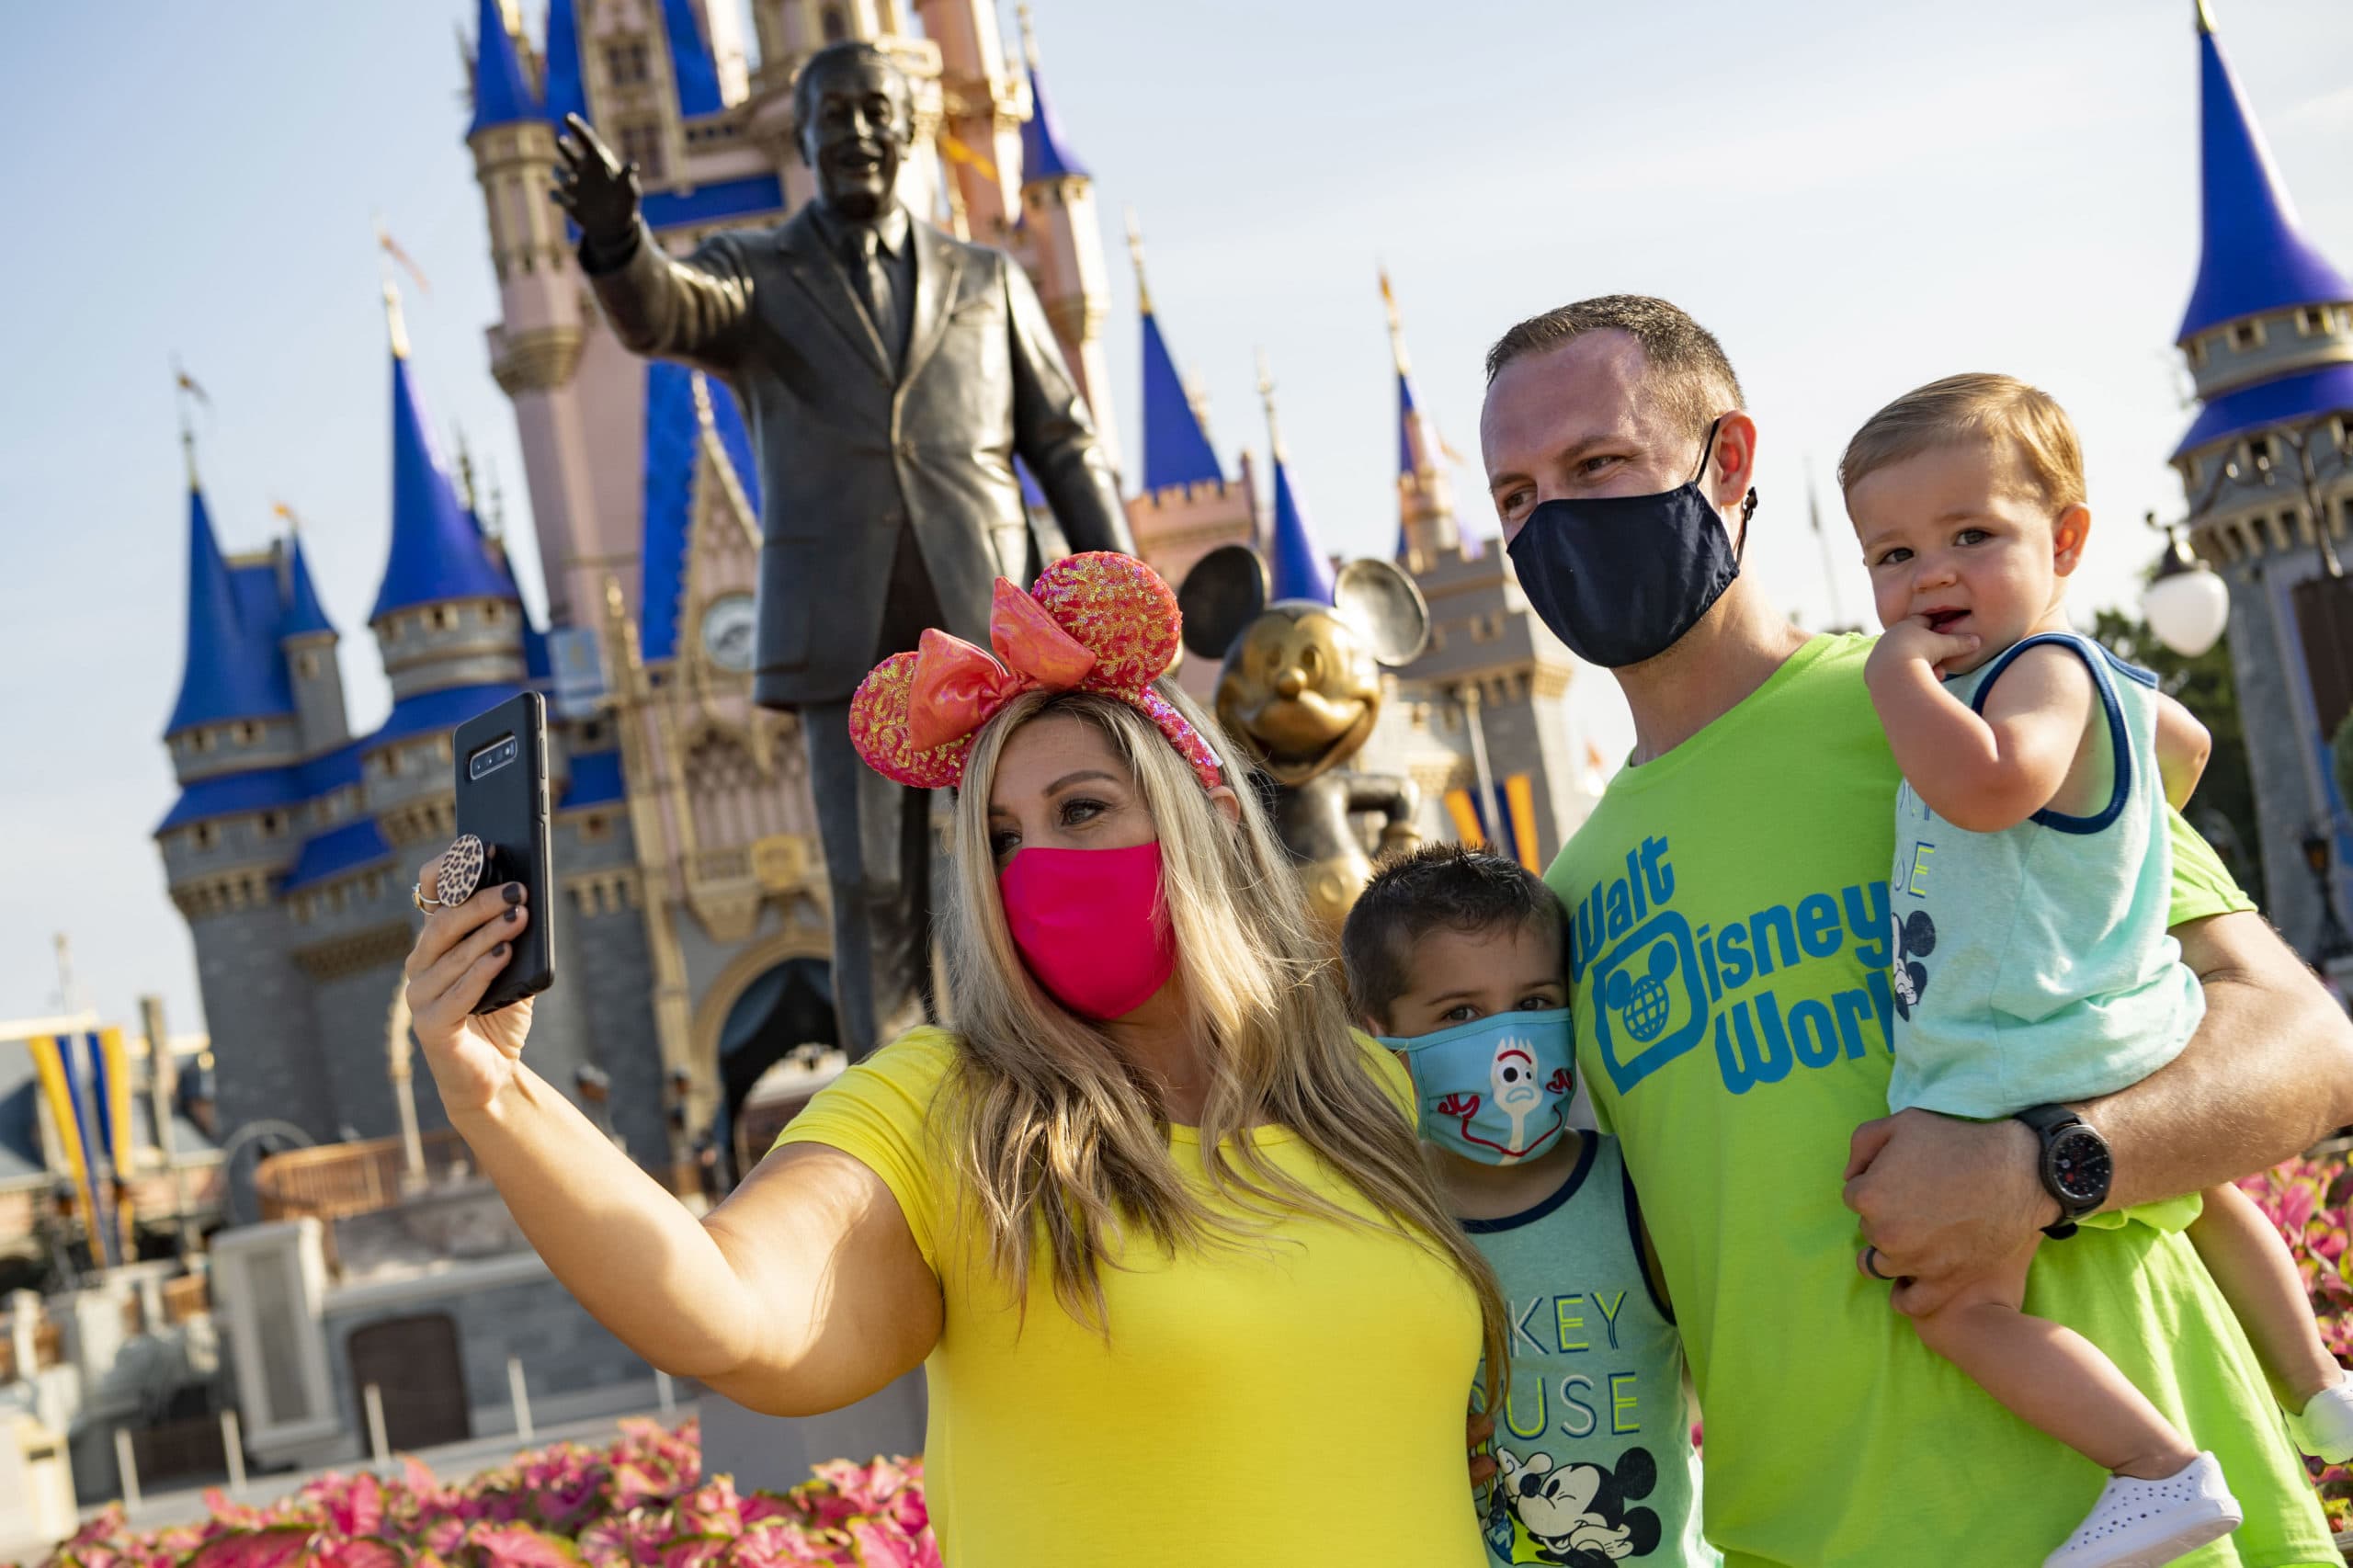 Disney’s Genie app is an all-in-one journey planner for its theme parks